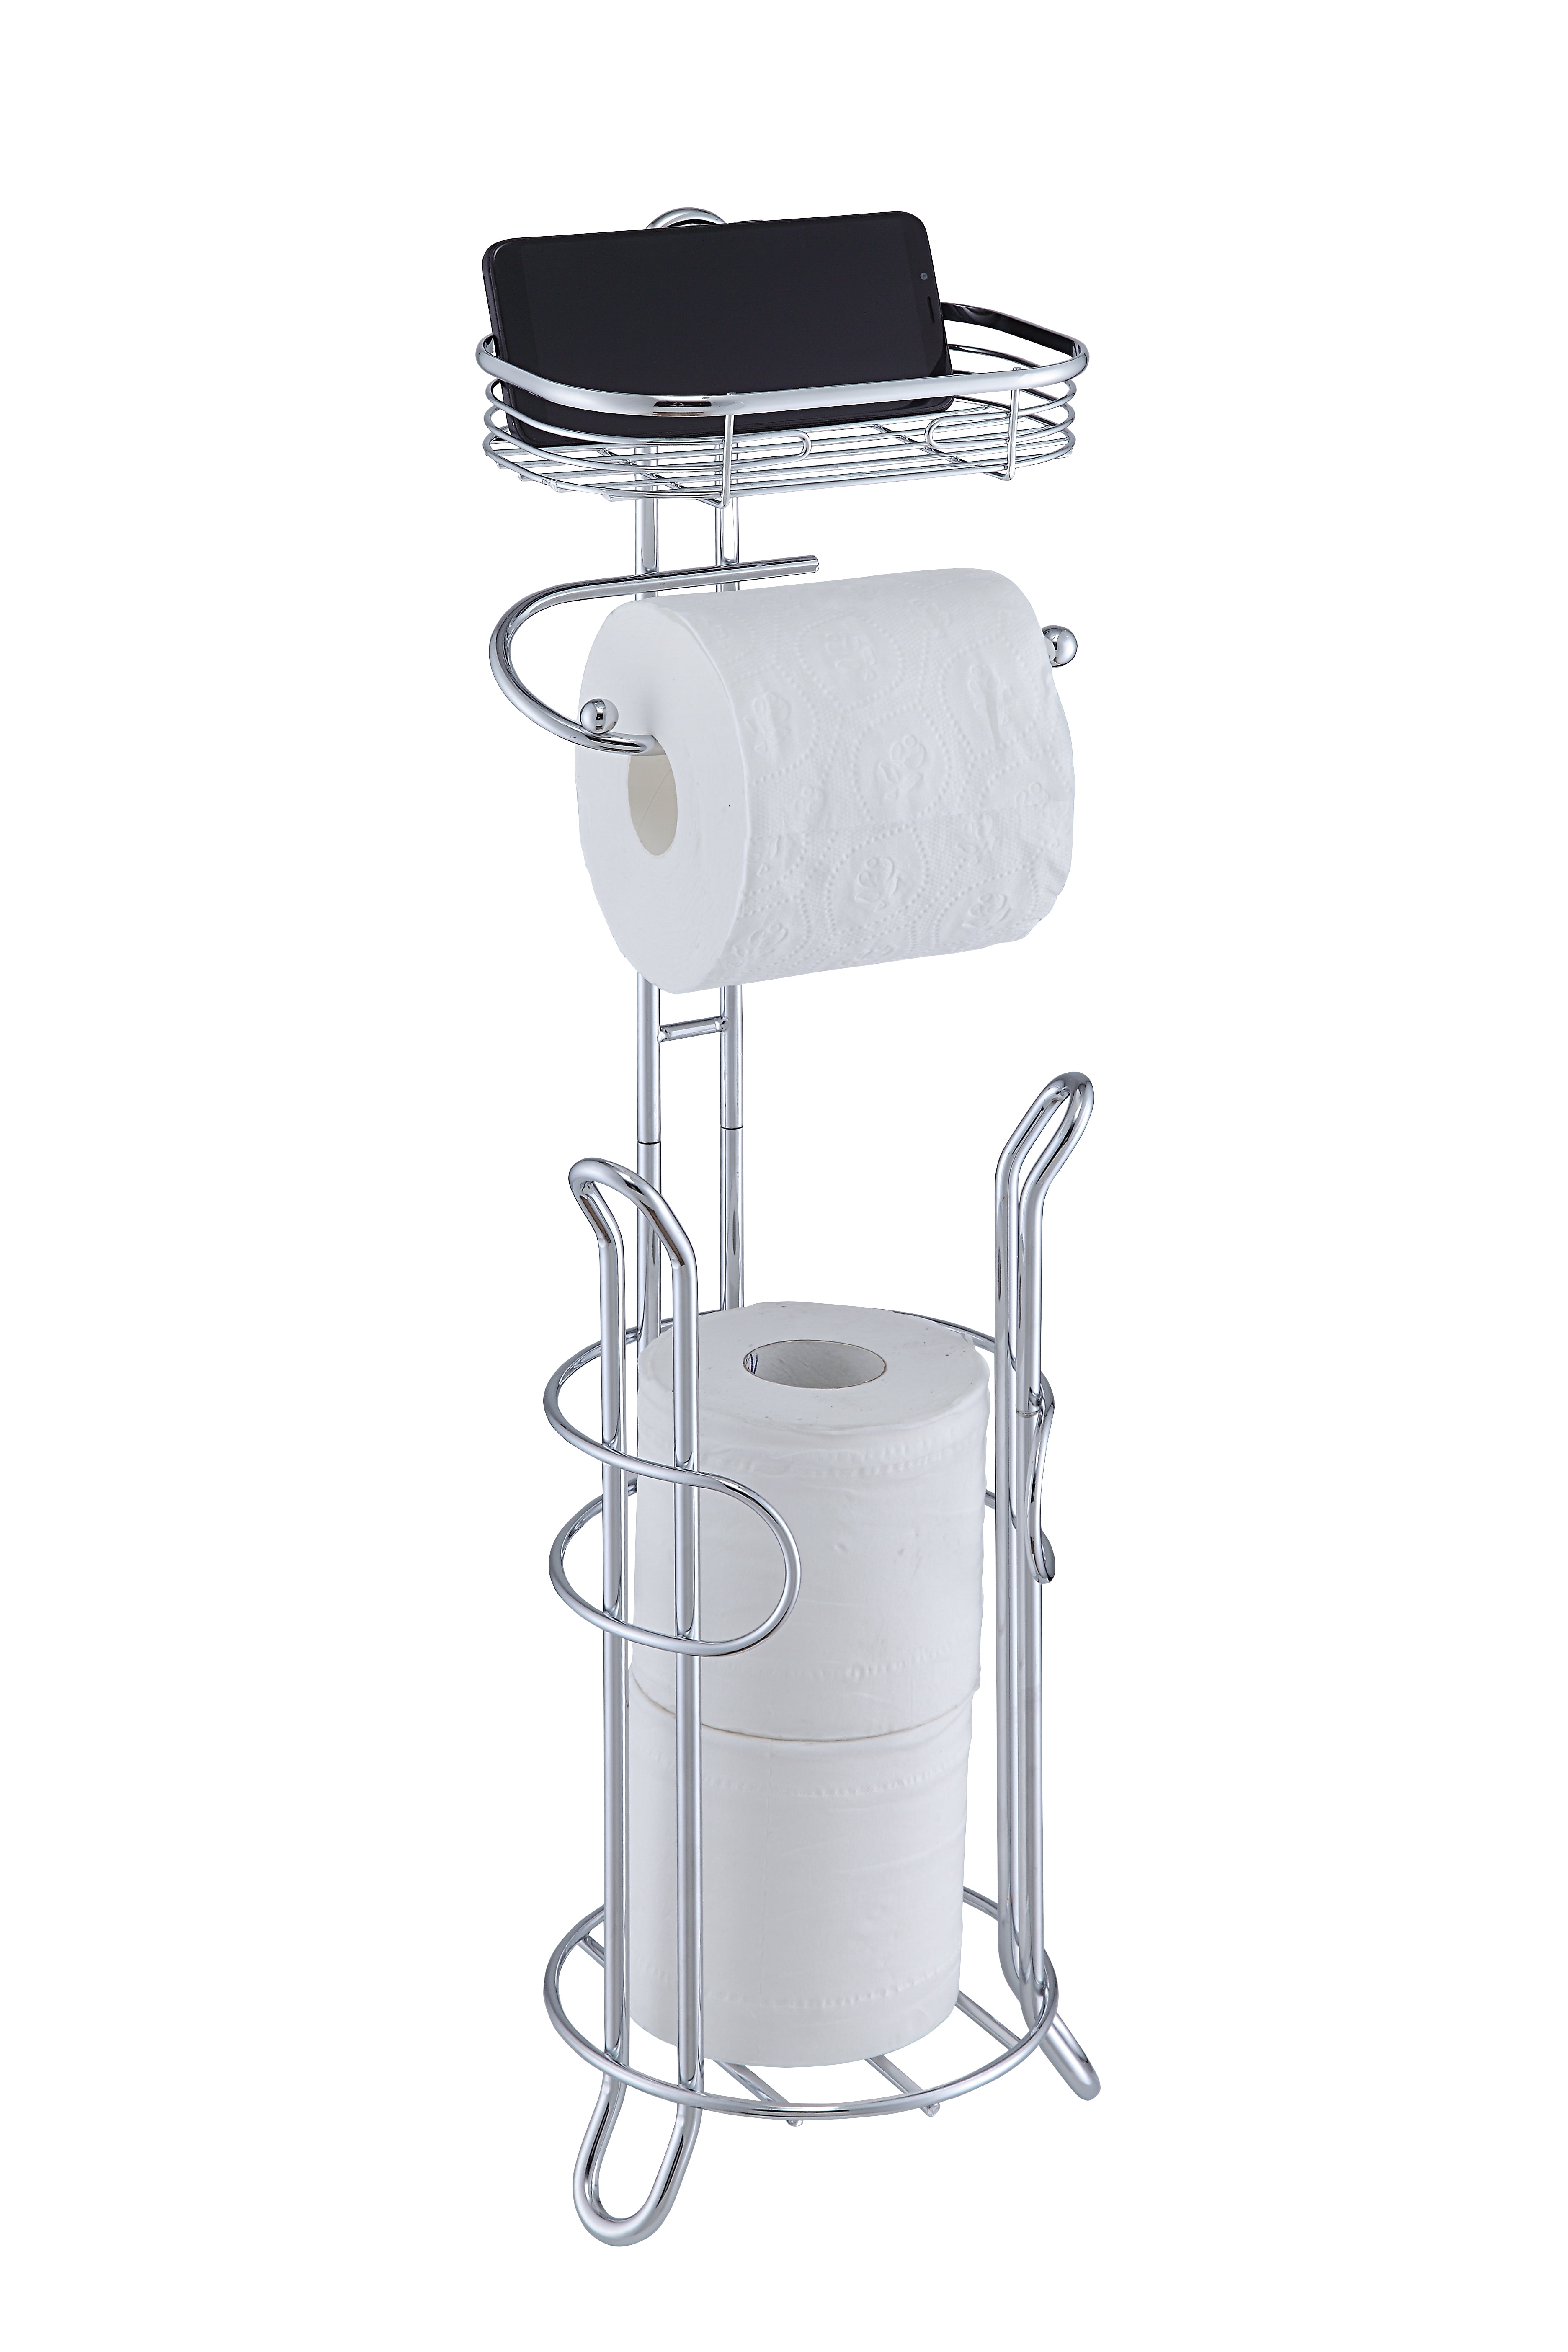  SunnyPoint Classic Bathroom Free Standing Toilet Tissue Paper  Roll Holder Stand : Tools & Home Improvement